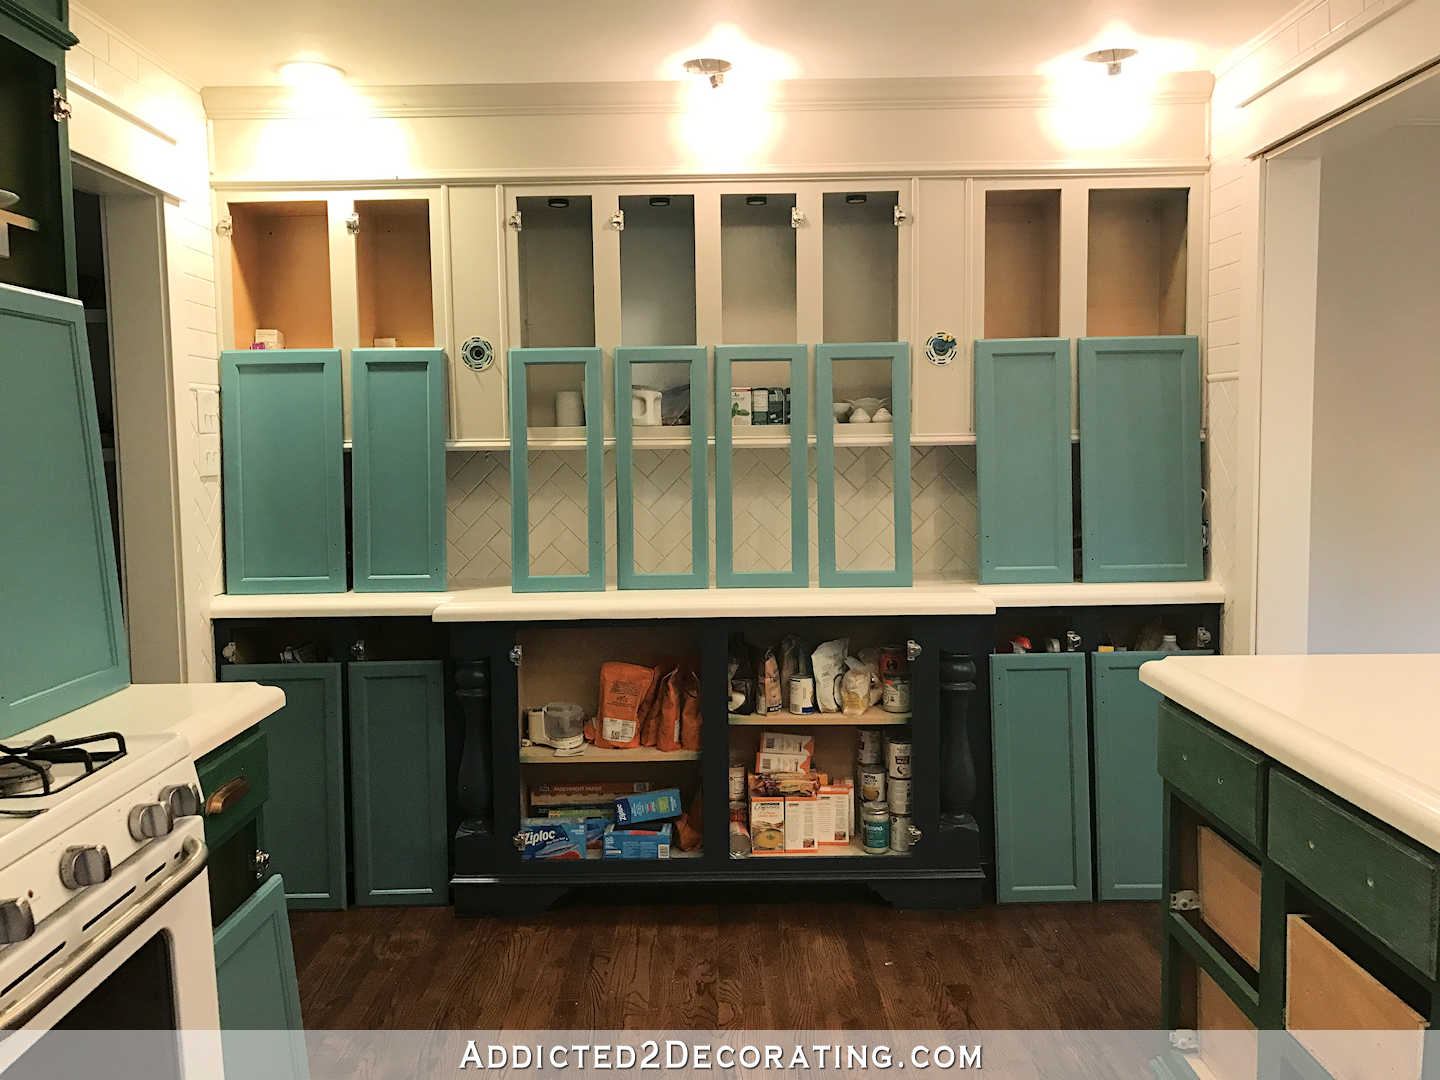 March goals - partially accomplished - painting kitchen cabinets